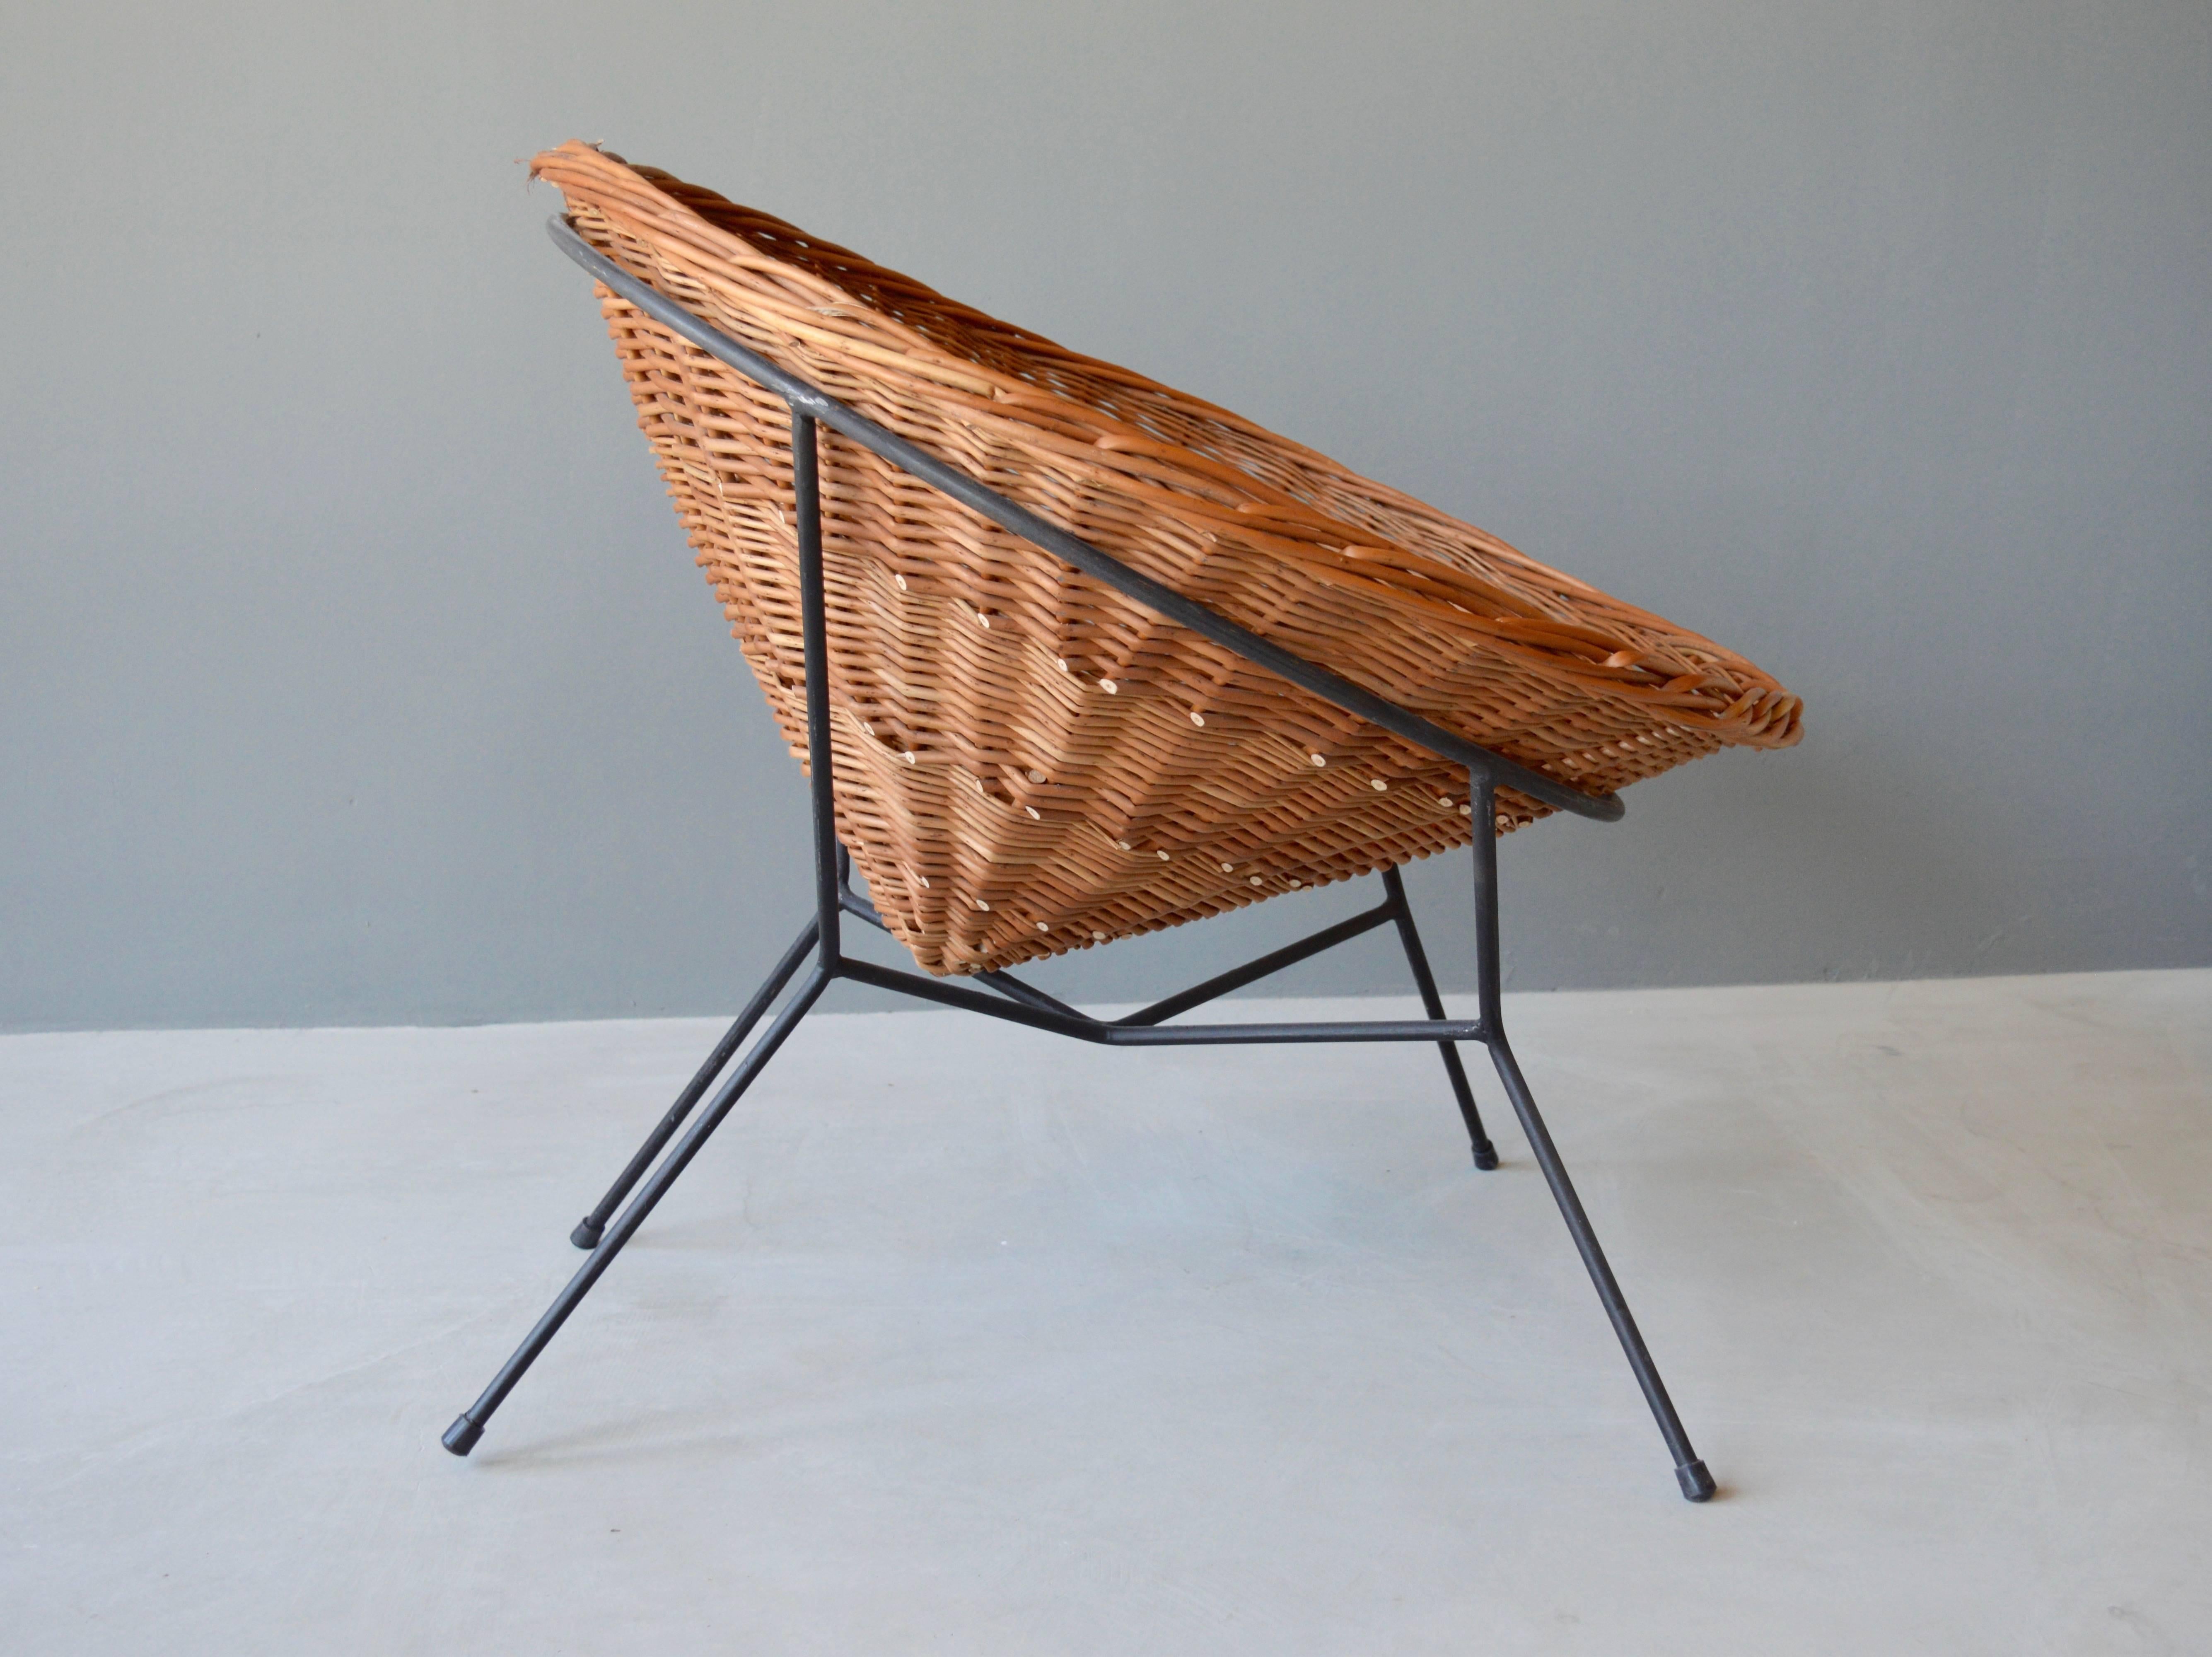 French sculptural rattan and iron chair. Handwoven cone shaped rattan seat sits freely inside the iron frame. One of a kind, prototype chair. Very good vintage condition.